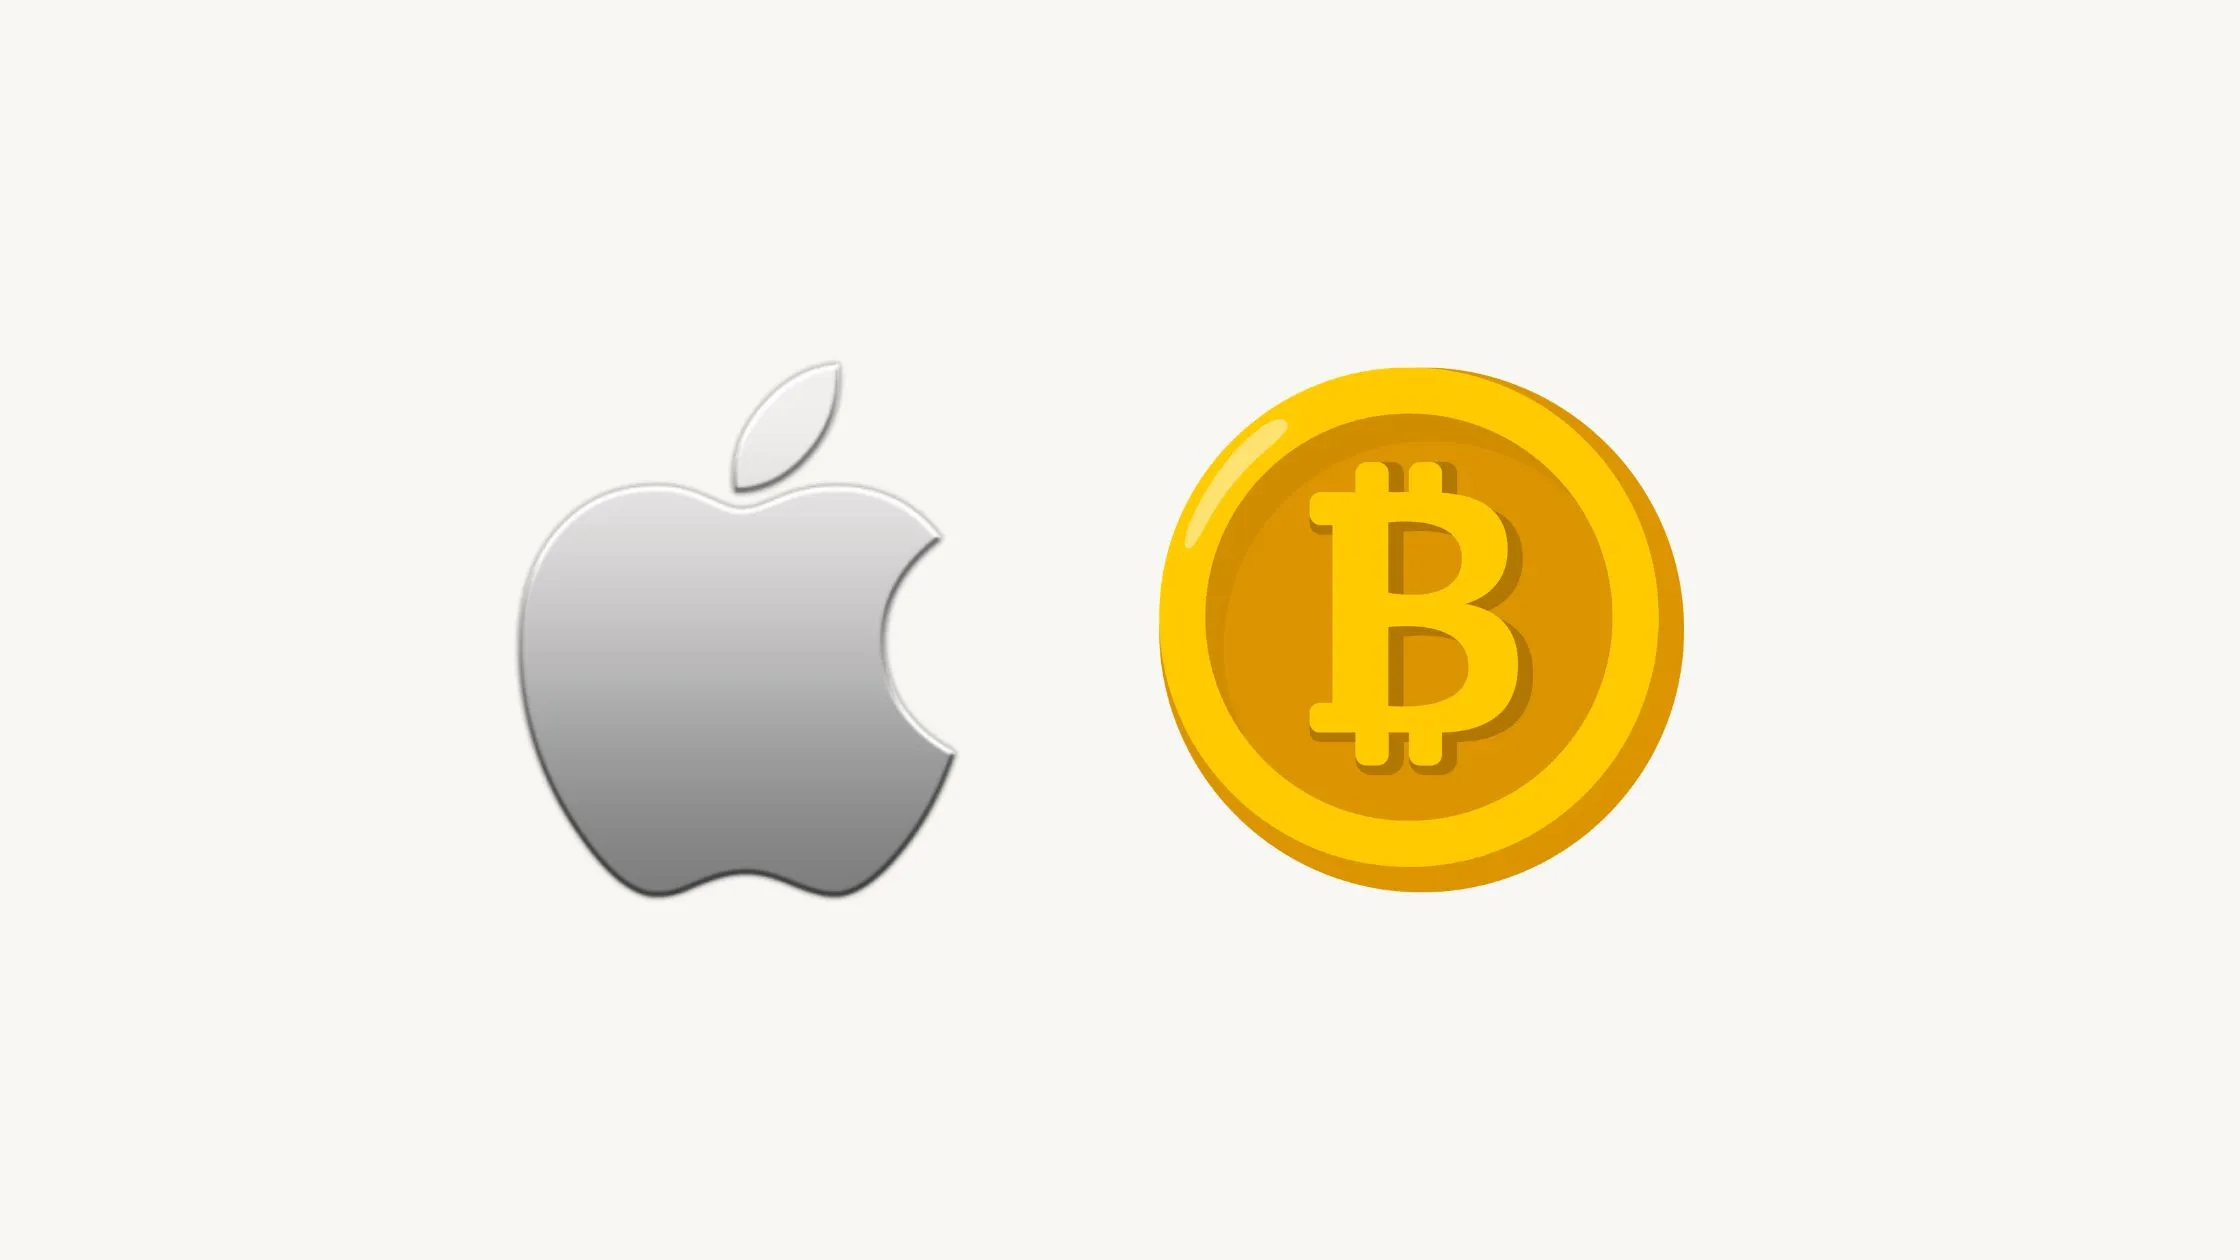 The Apple Bitcoin Store